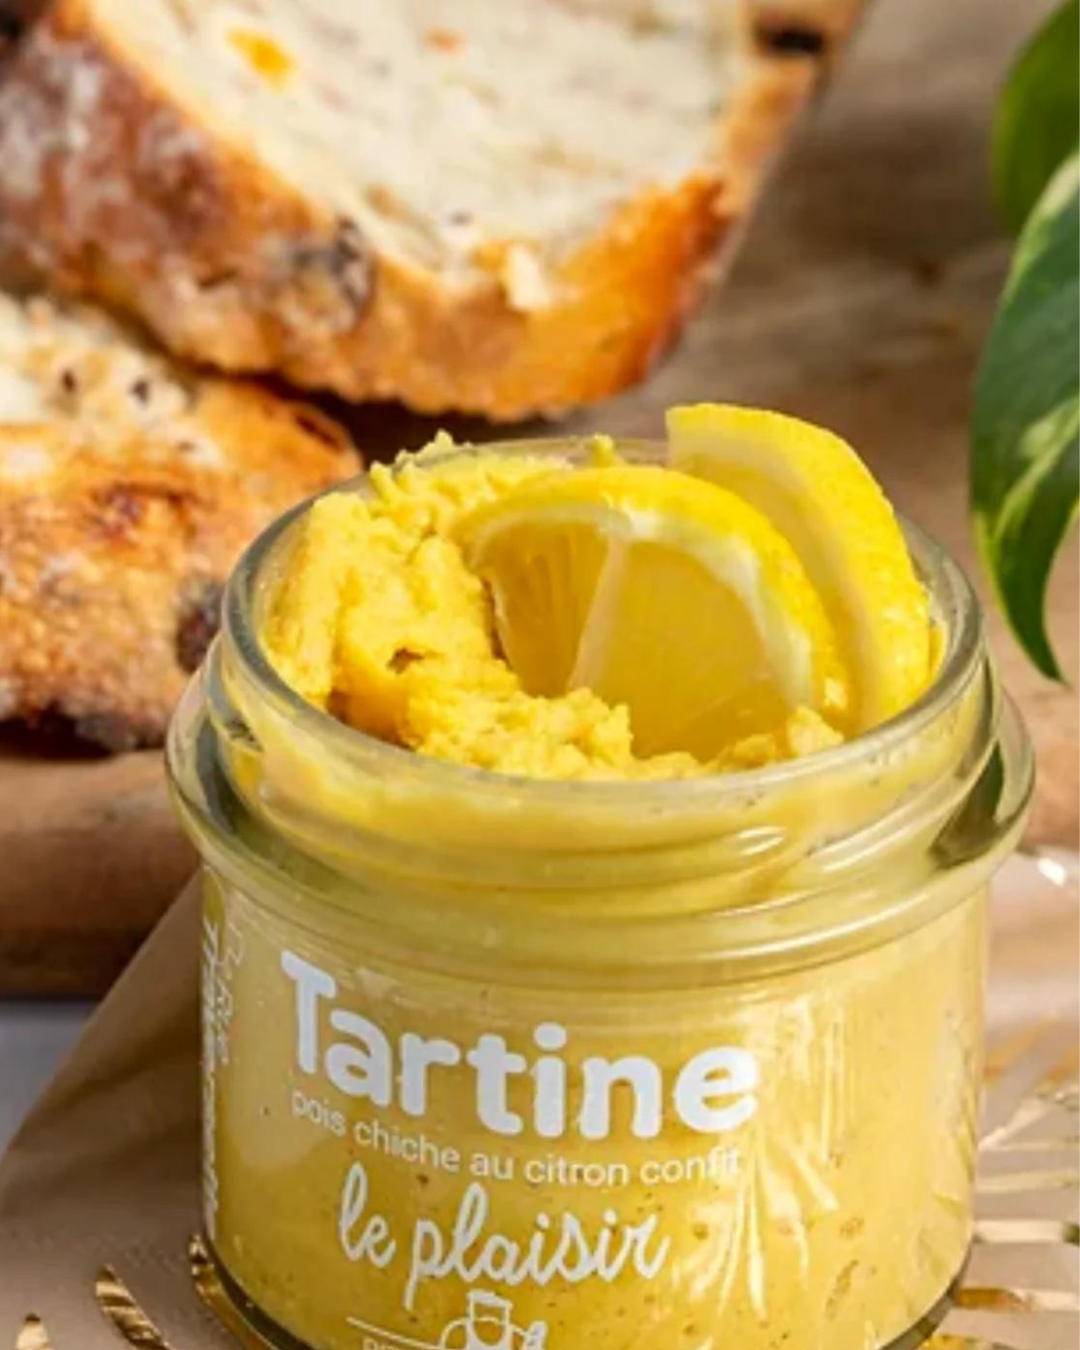 Chickpea Spread with Candied Lemon, 105g